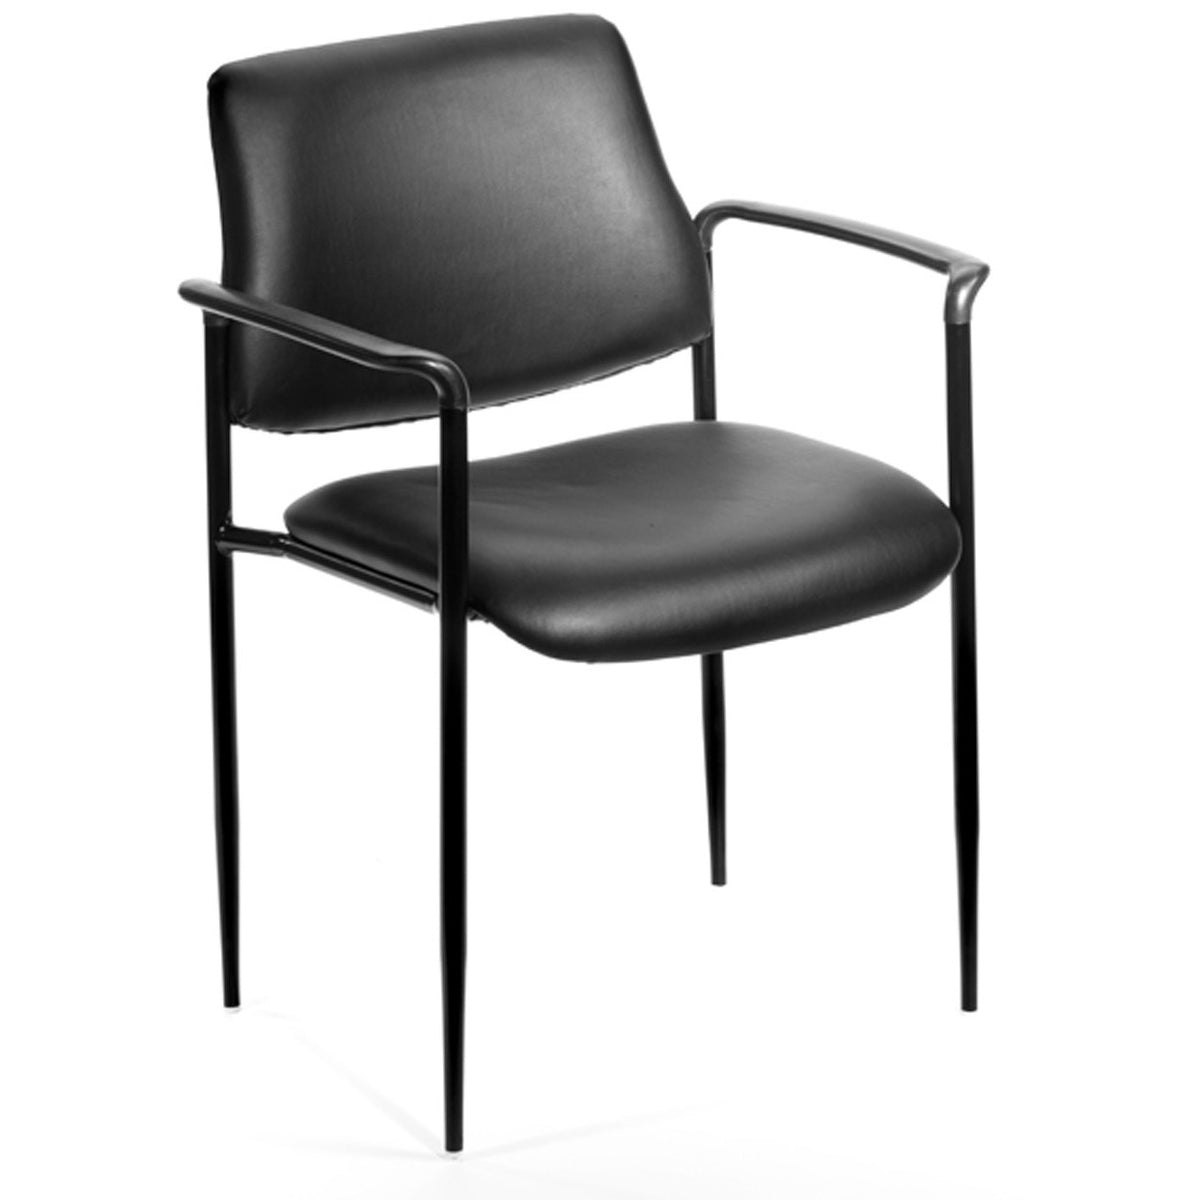 Square Back Diamond Stacking Chair with Arm In Black Caressoft, B9503-CS